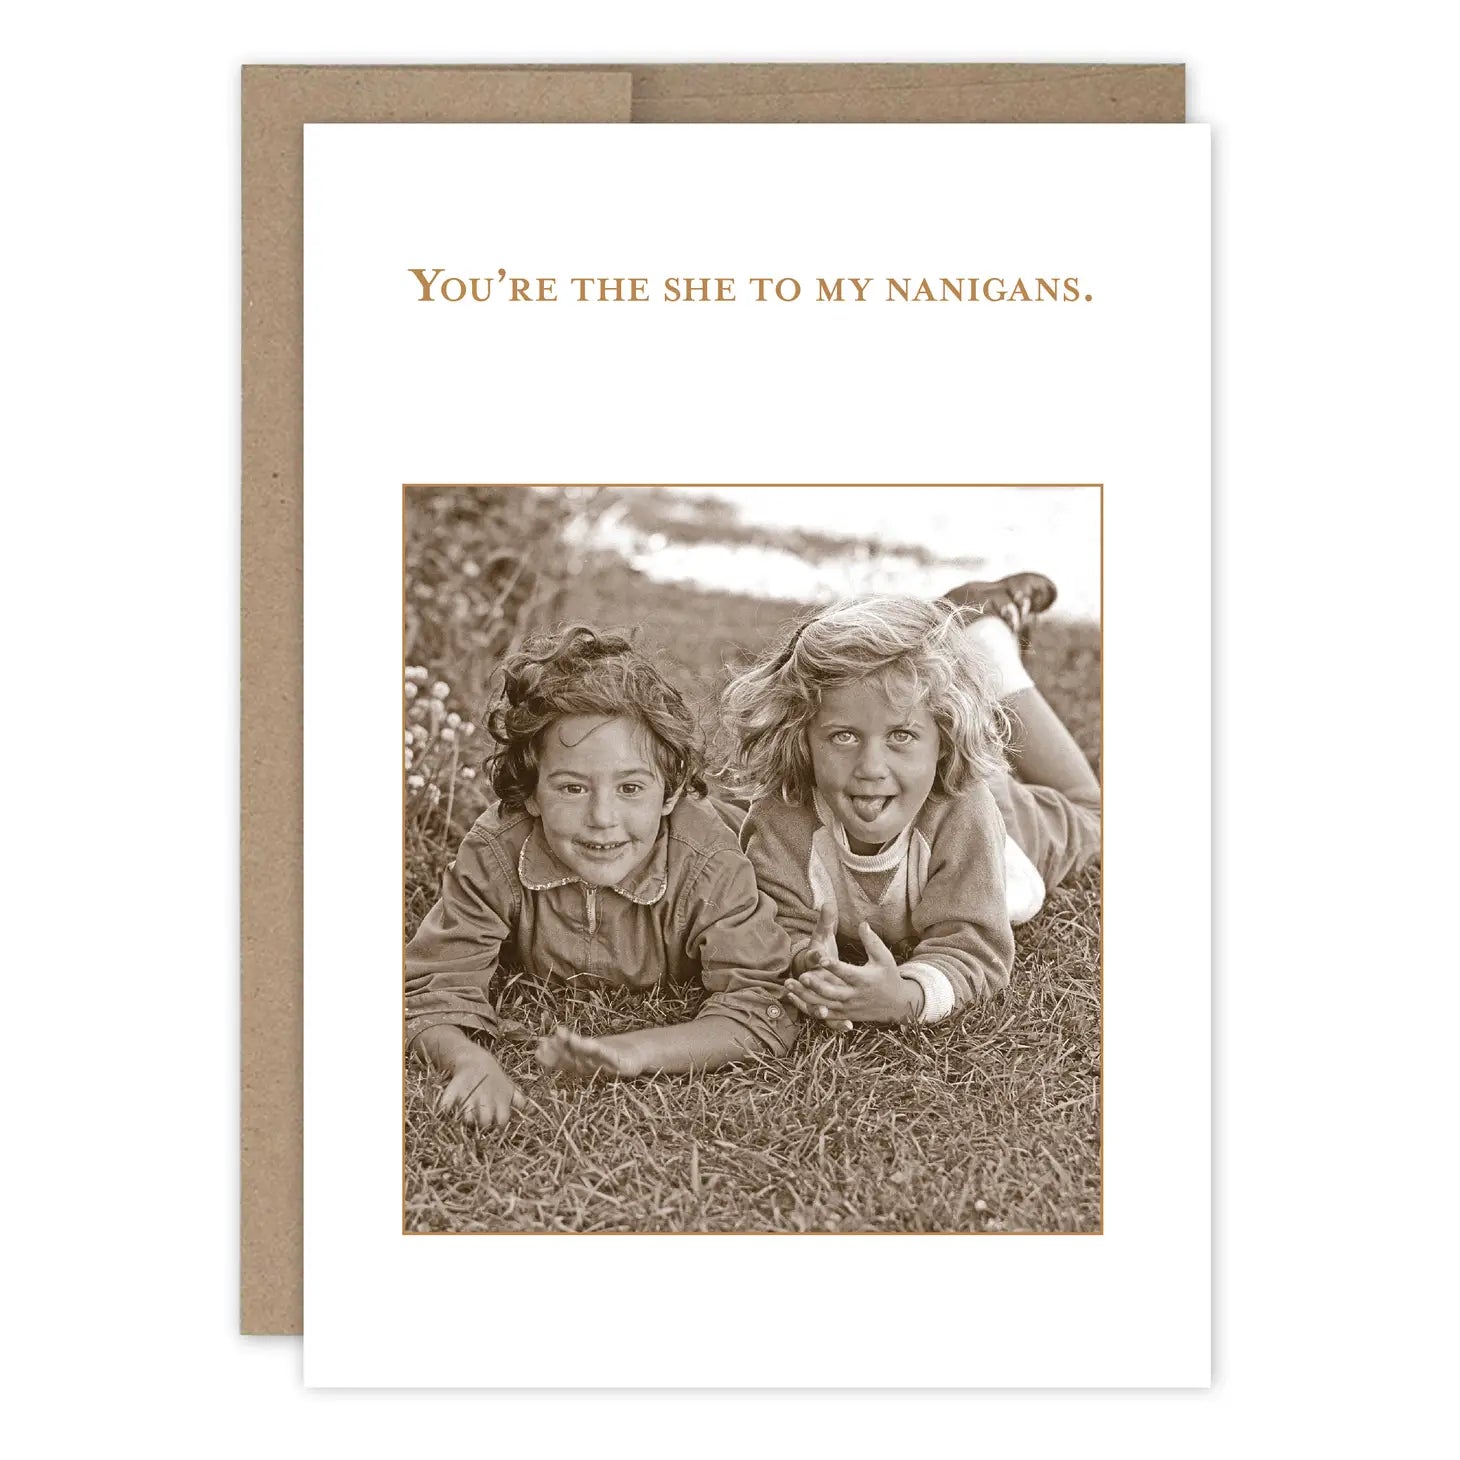 You're the she to my nanigans greeting card